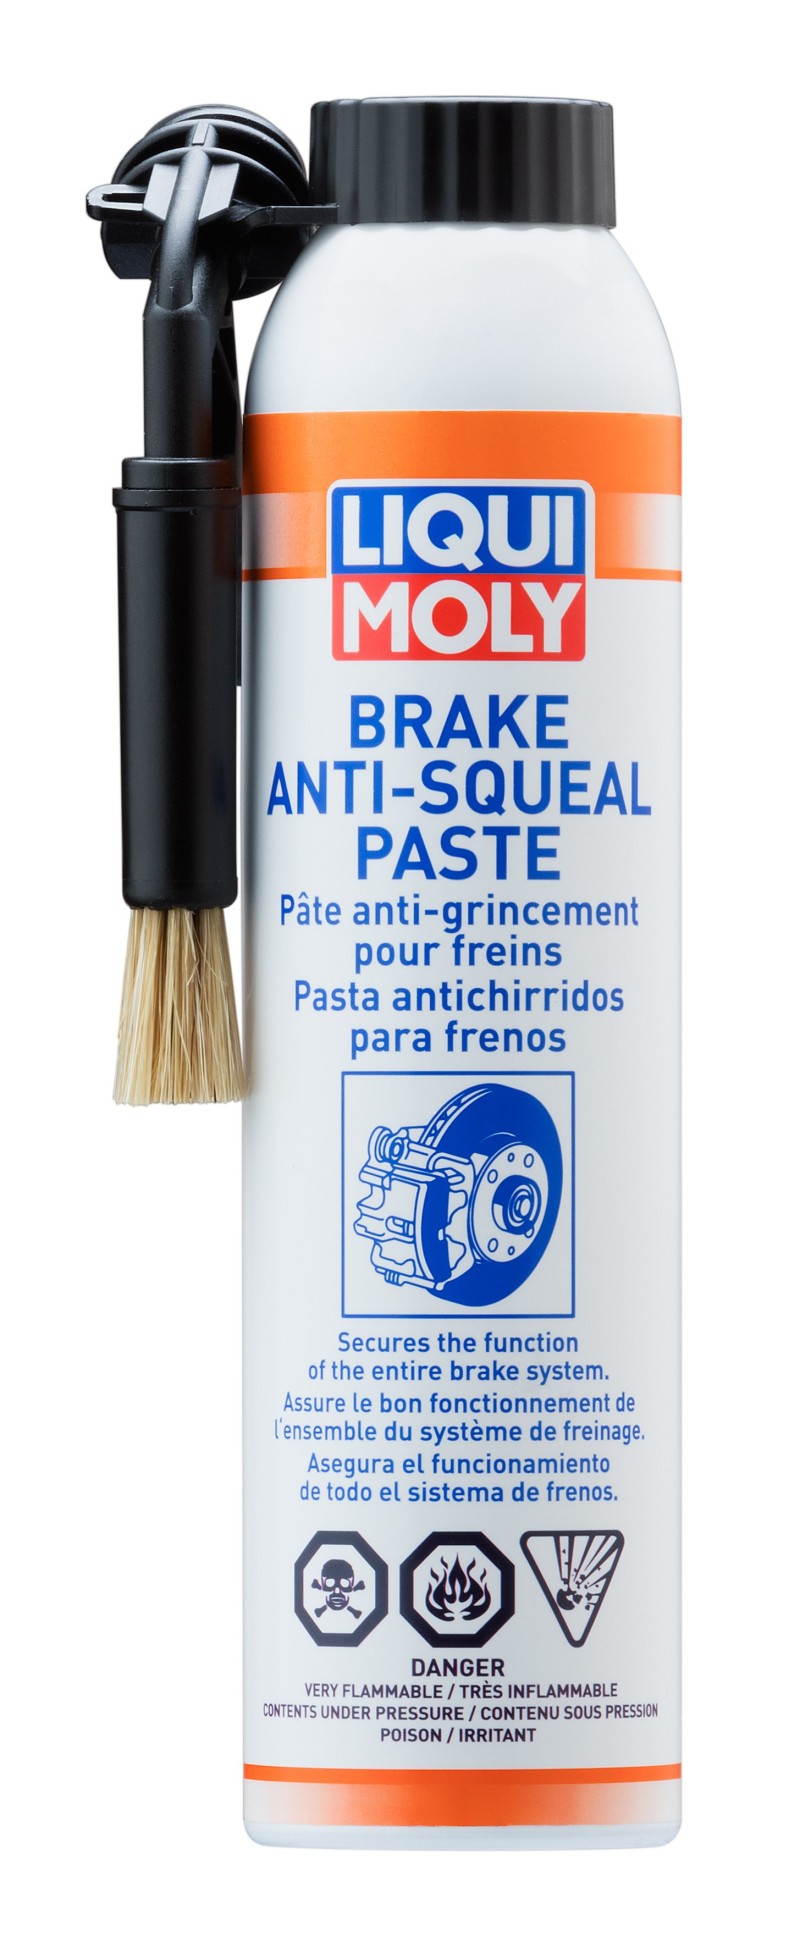 LIQUI MOLY 200mL Brake Anti-Squeal Paste (Can w/ Brush) - Case of 6